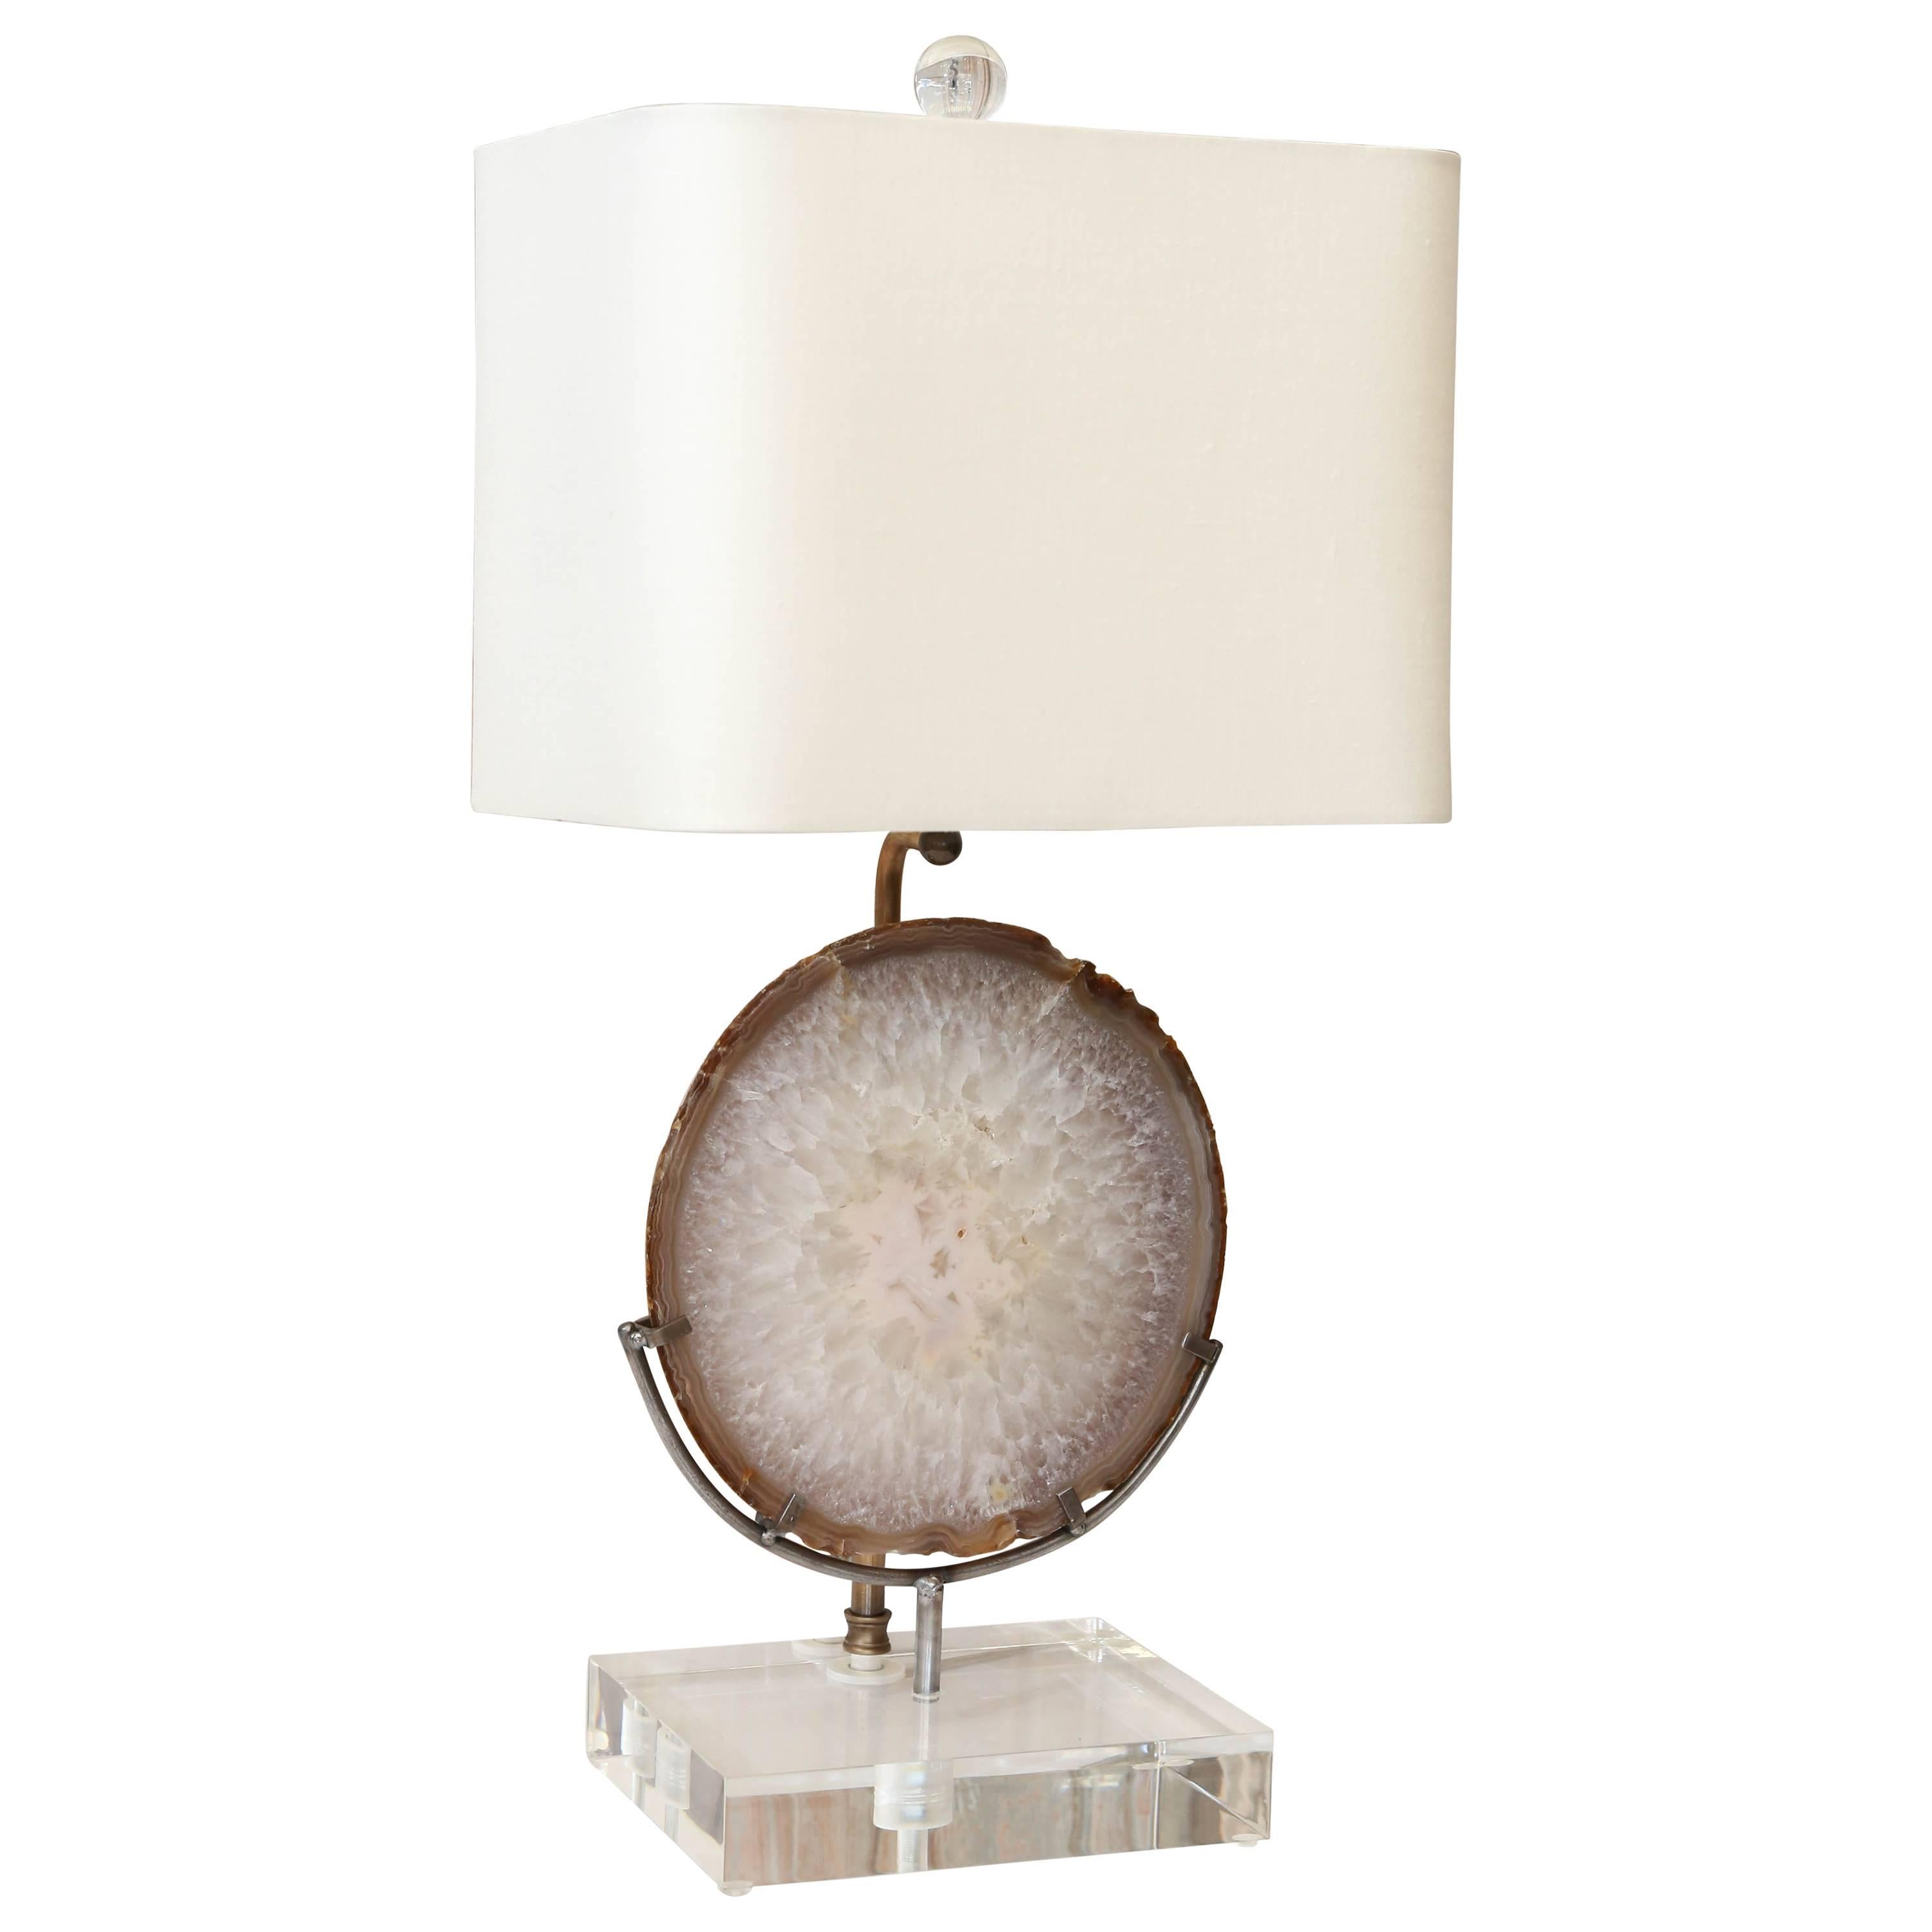 Agate lamp on Lucite base, newly wired for use within the USA. Sold with complementary linen shade (measurements include shade).